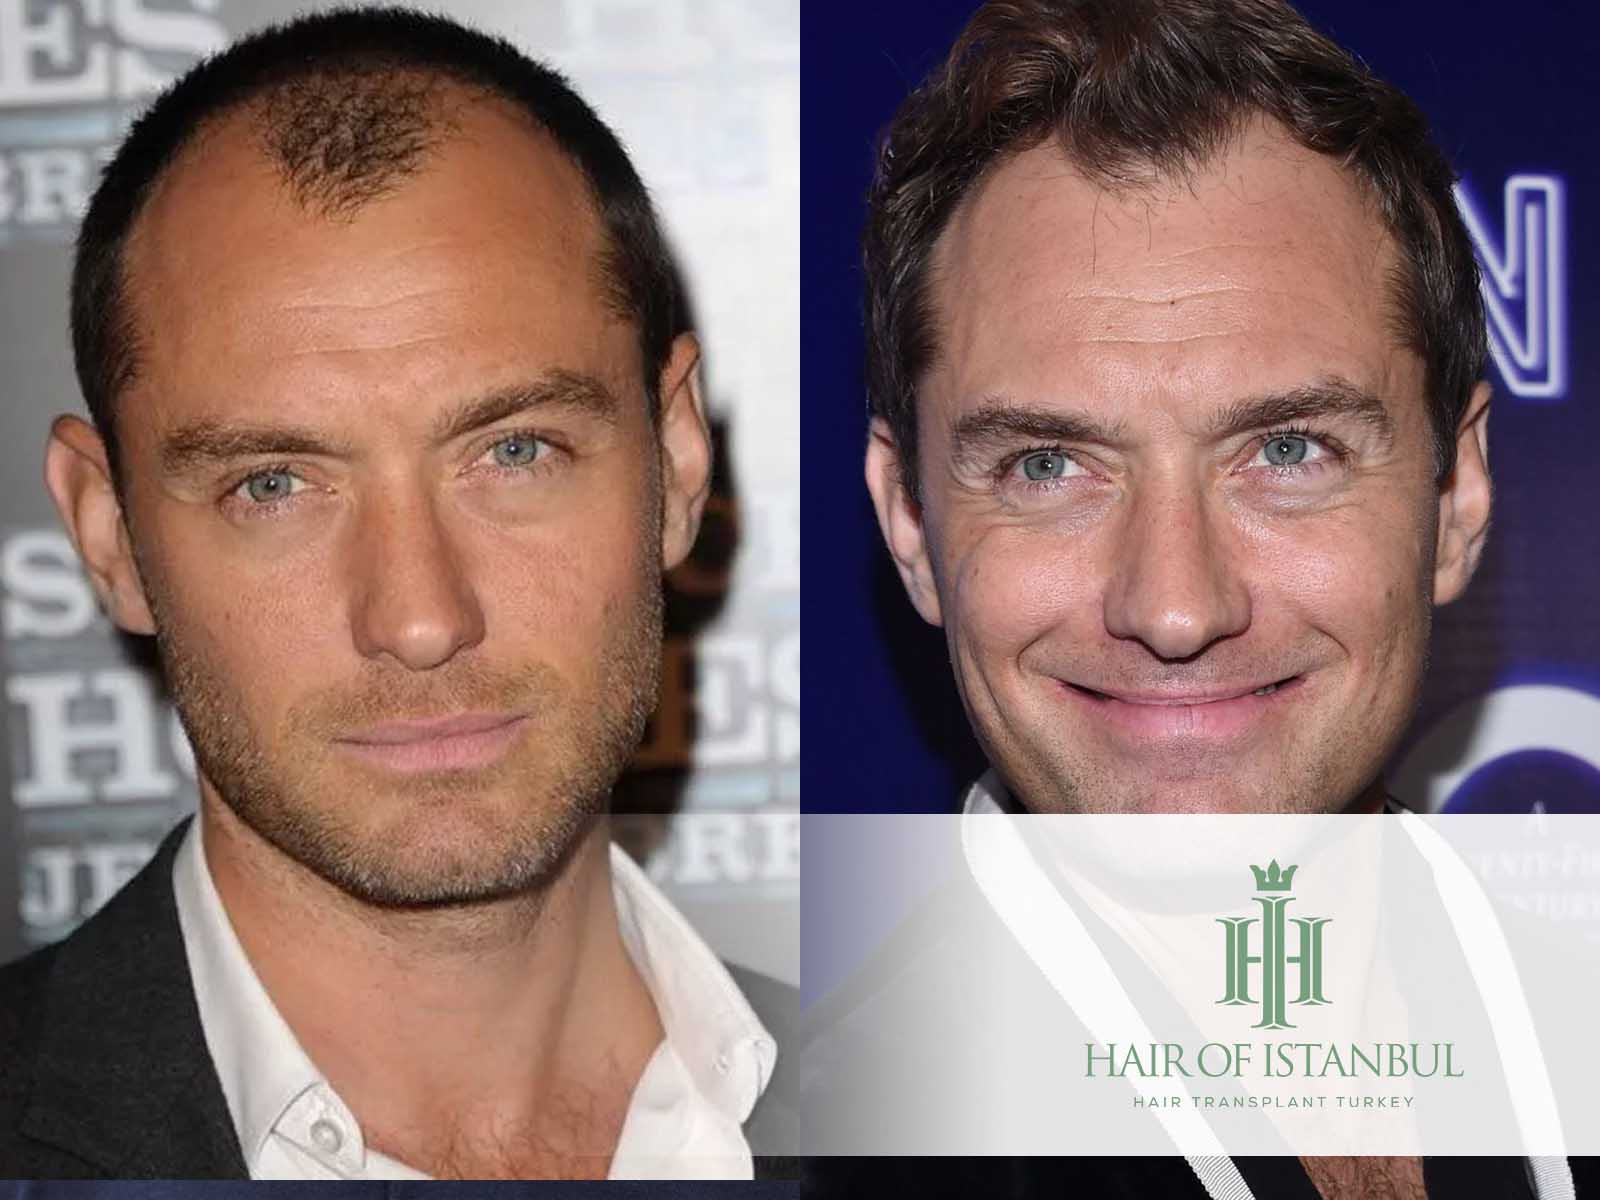 Jude Law Hair Transplant: The Real Story Behind the Locks